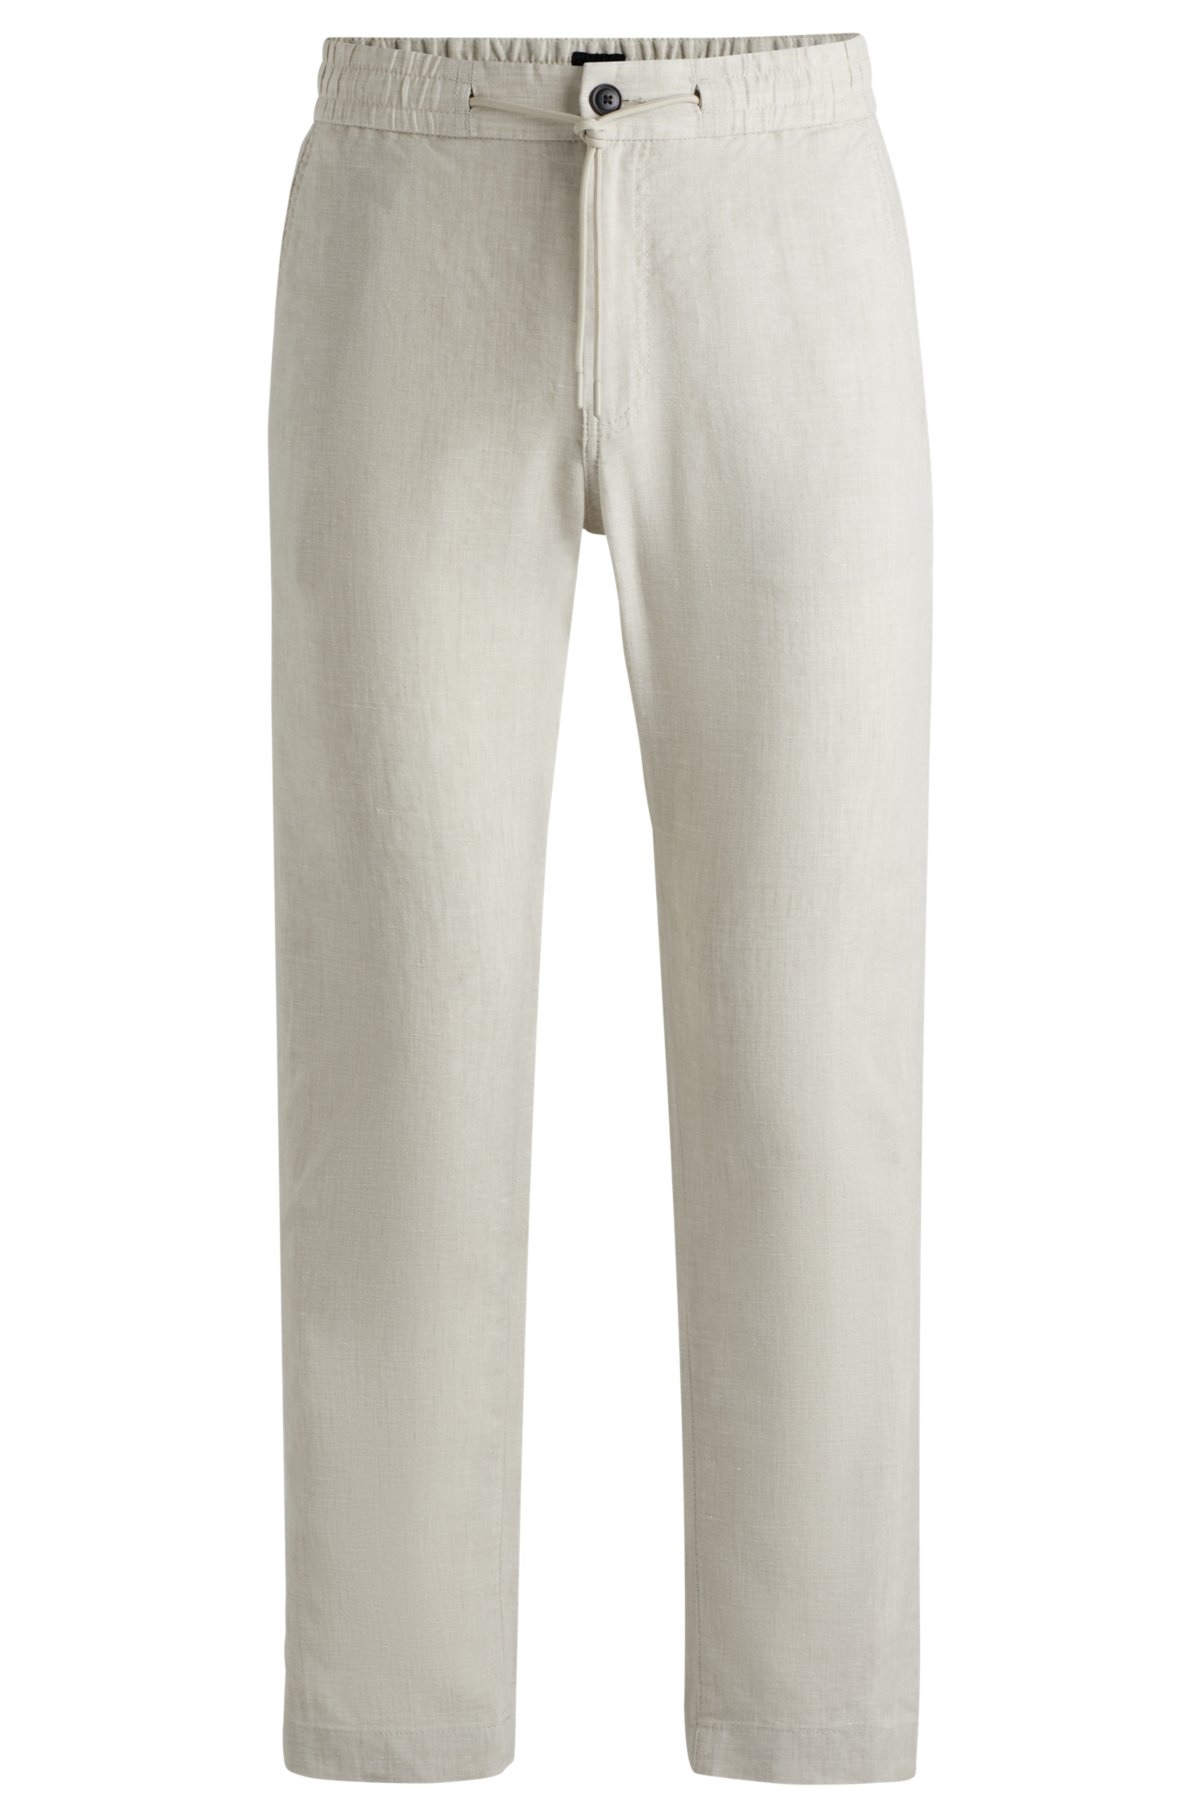 Tapered-fit trousers in a linen blend, Light Beige